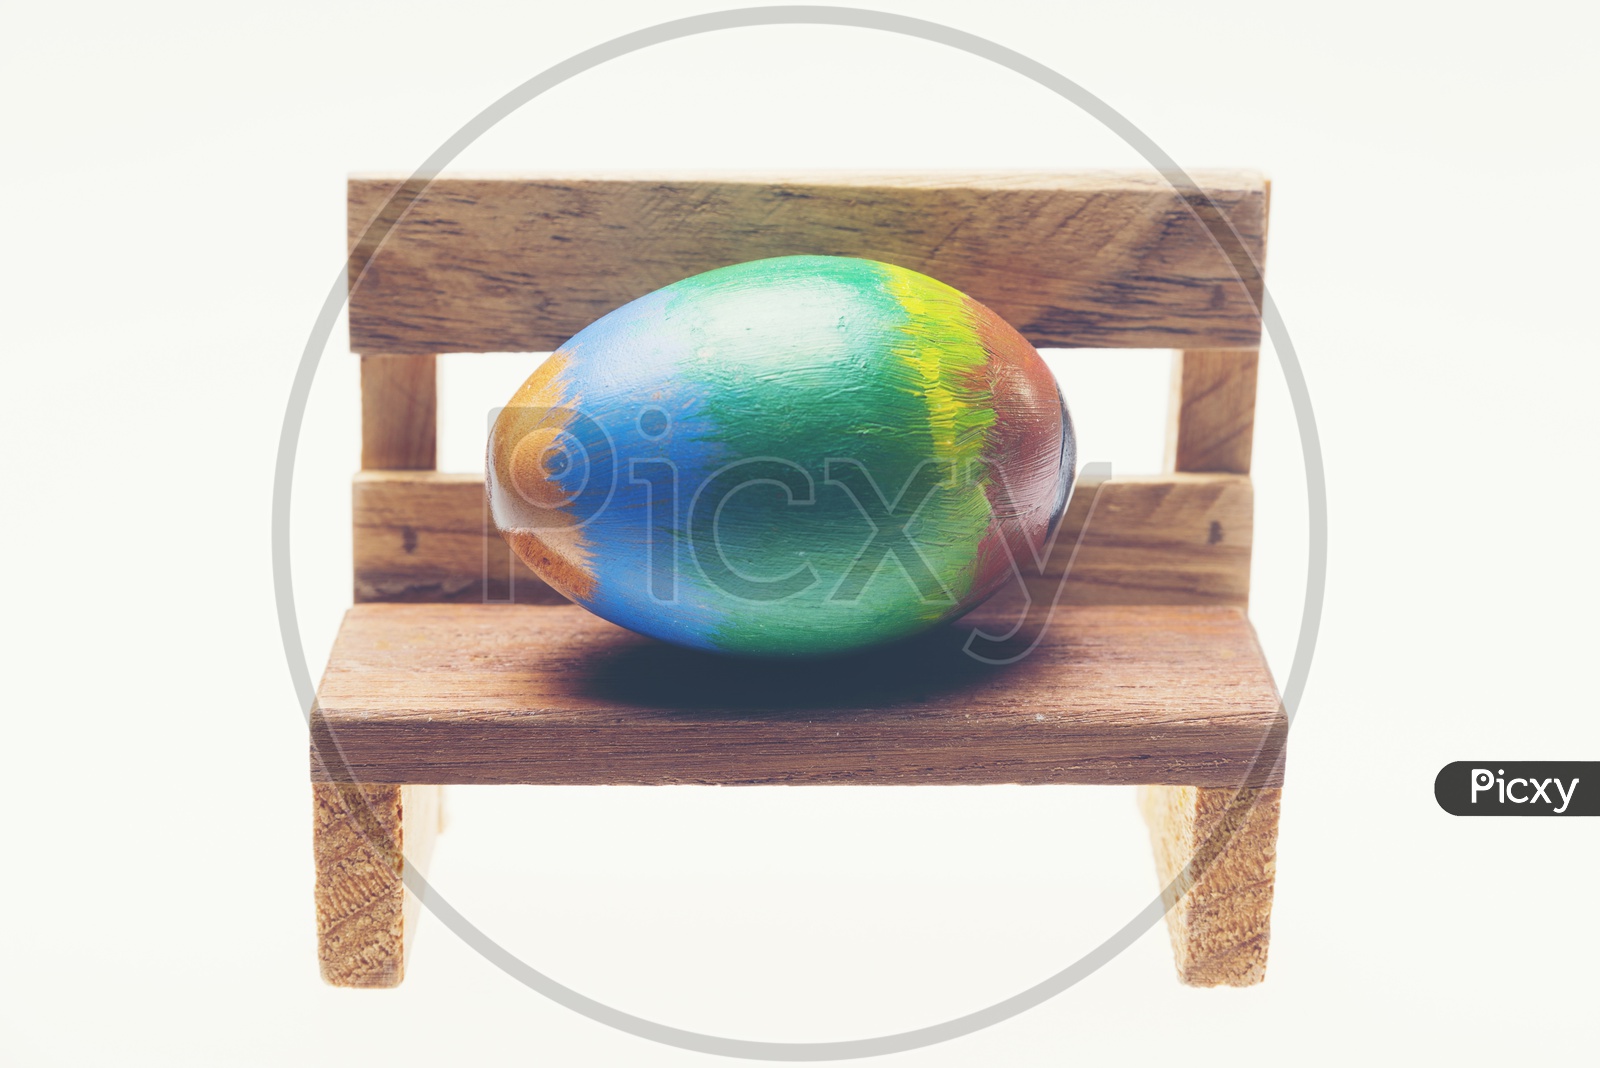 Colorful Handmade Easter Egg On Wooden Bench on an Isolated white Background